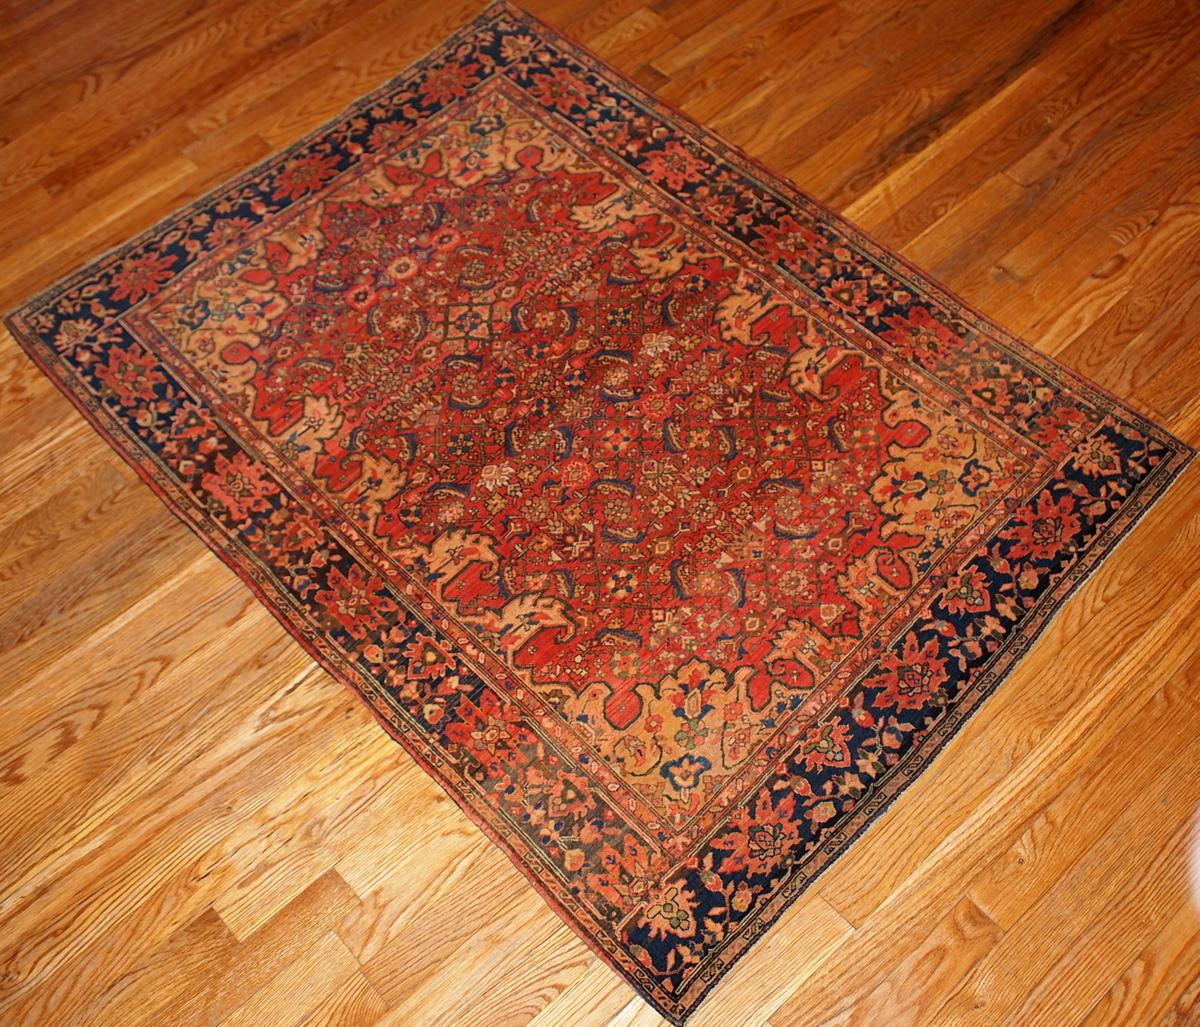 Fine weaved Persian Sarouk Farahan rug in unusual colors and design. The rug is in original good condition, contains bright shades.
 